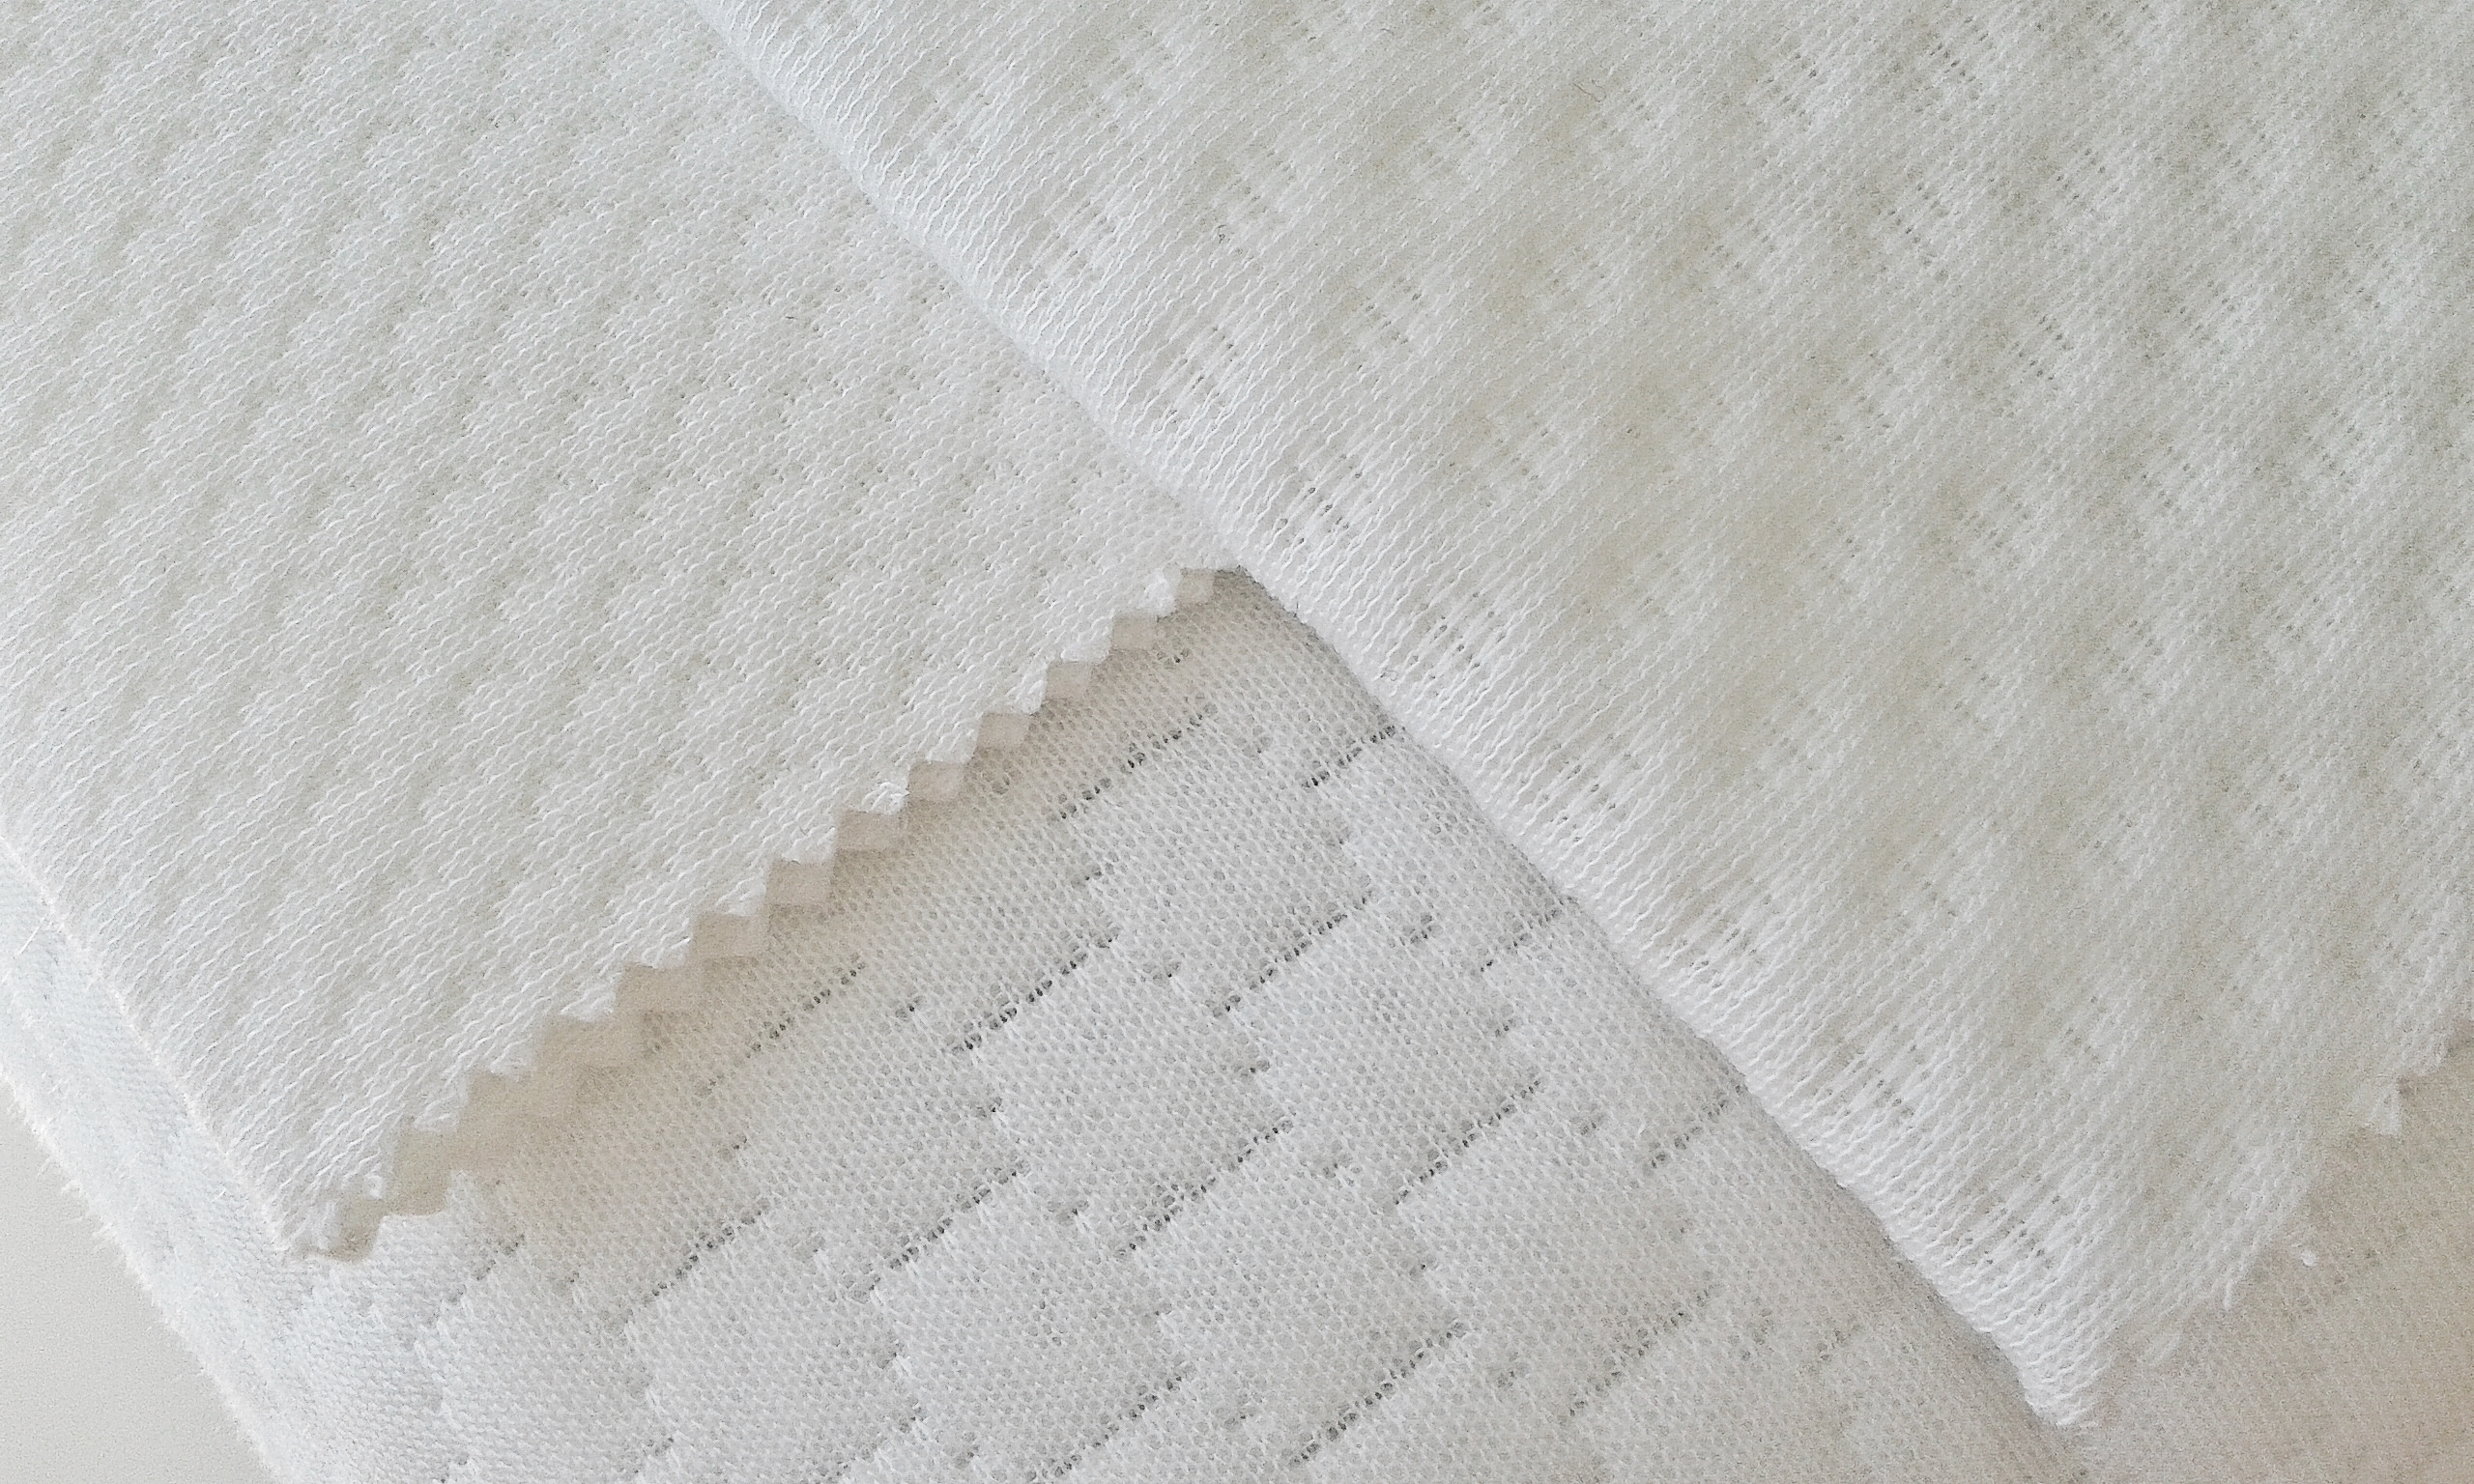 The new Trevira CS mattress cover qualities by Mattes & Ammann © Trevira GmbH/Mattes & Ammann